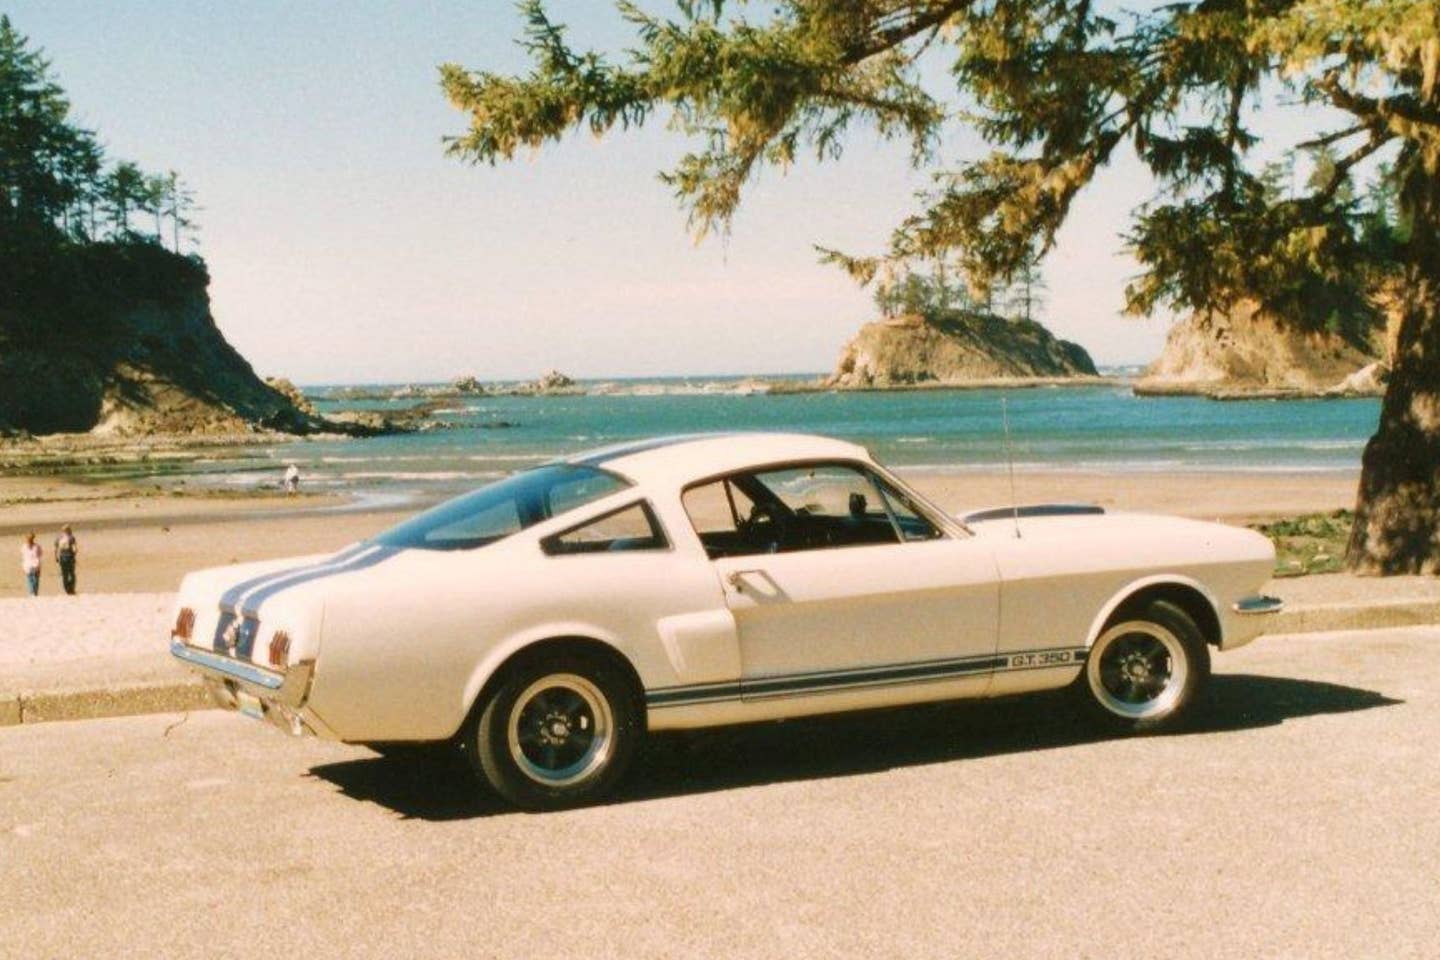 White car on beach in front of blue water